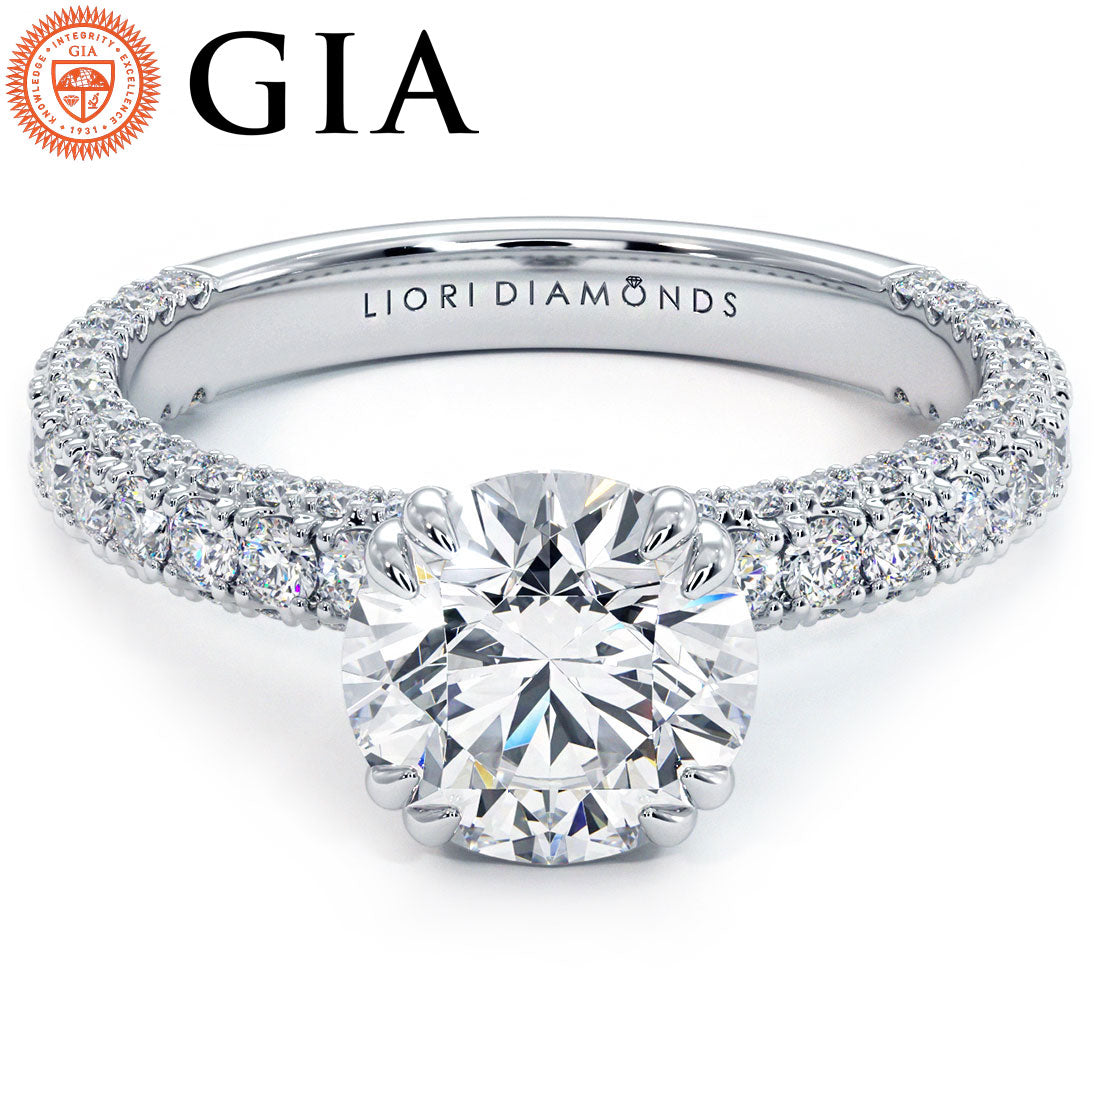 2.40ctw GIA Certified Round Brilliant 3D Micropavé Shank Lab Grown Diamond Engagement Ring set in 18k White Gold